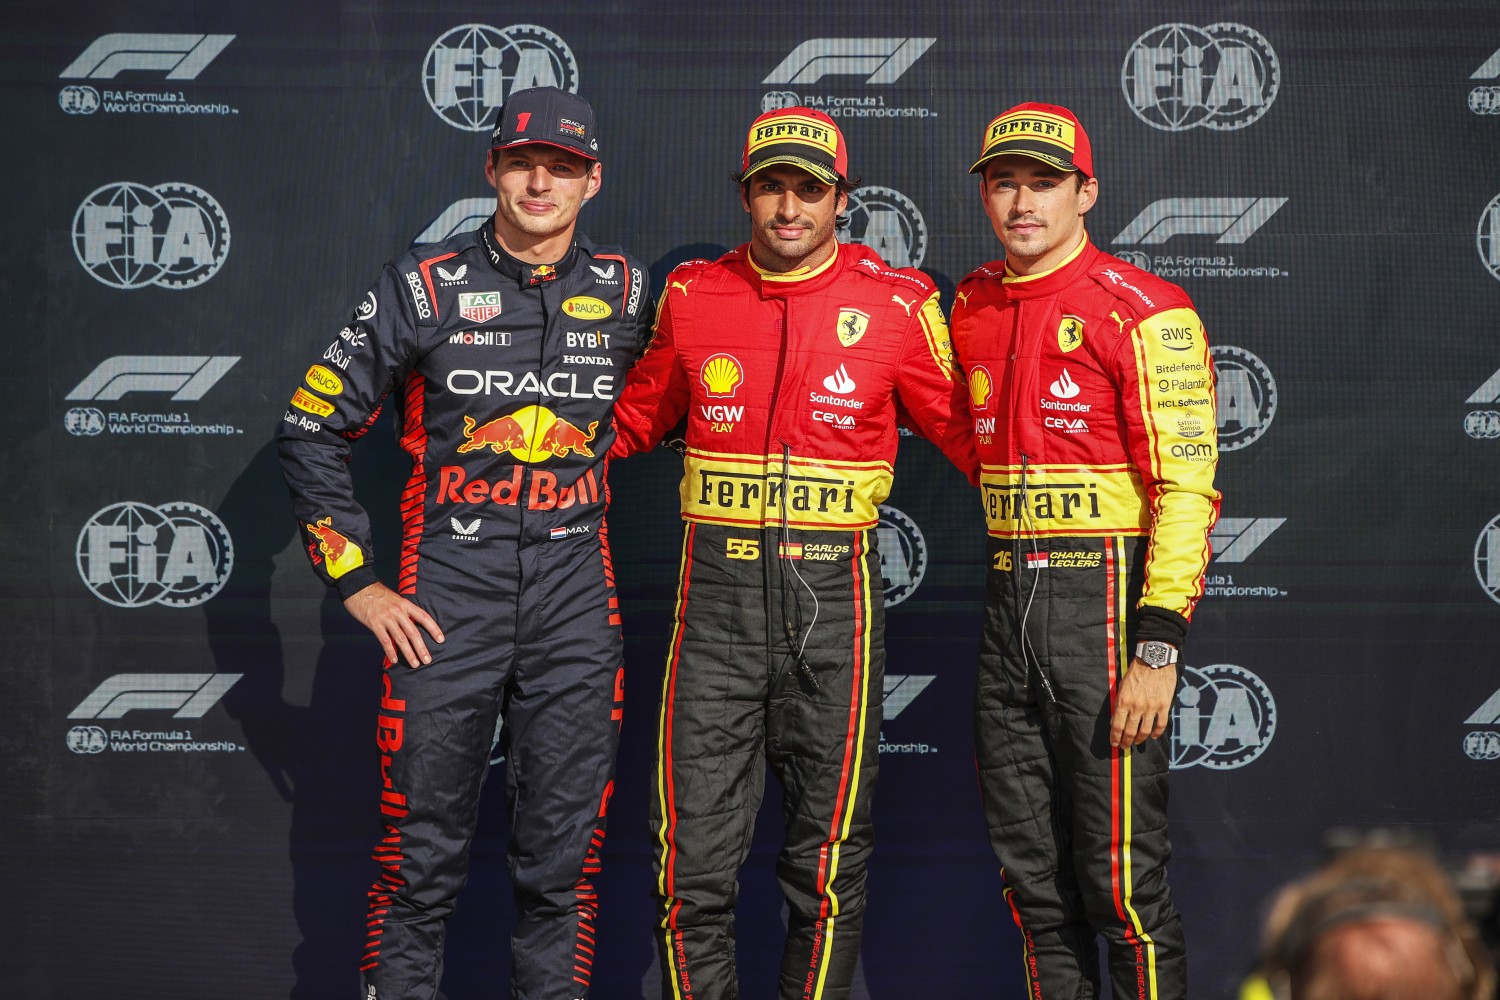 Top three qualifiers Max Verstappen, Red Bull Racing, pole man Carlos Sainz, Scuderia Ferrari, and Charles Leclerc, Scuderia Ferrari during the Italian GP at Autodromo Nazionale Monza on Saturday September 02, 2023 in Monza, Italy. (Photo by Zak Mauger / LAT Images)